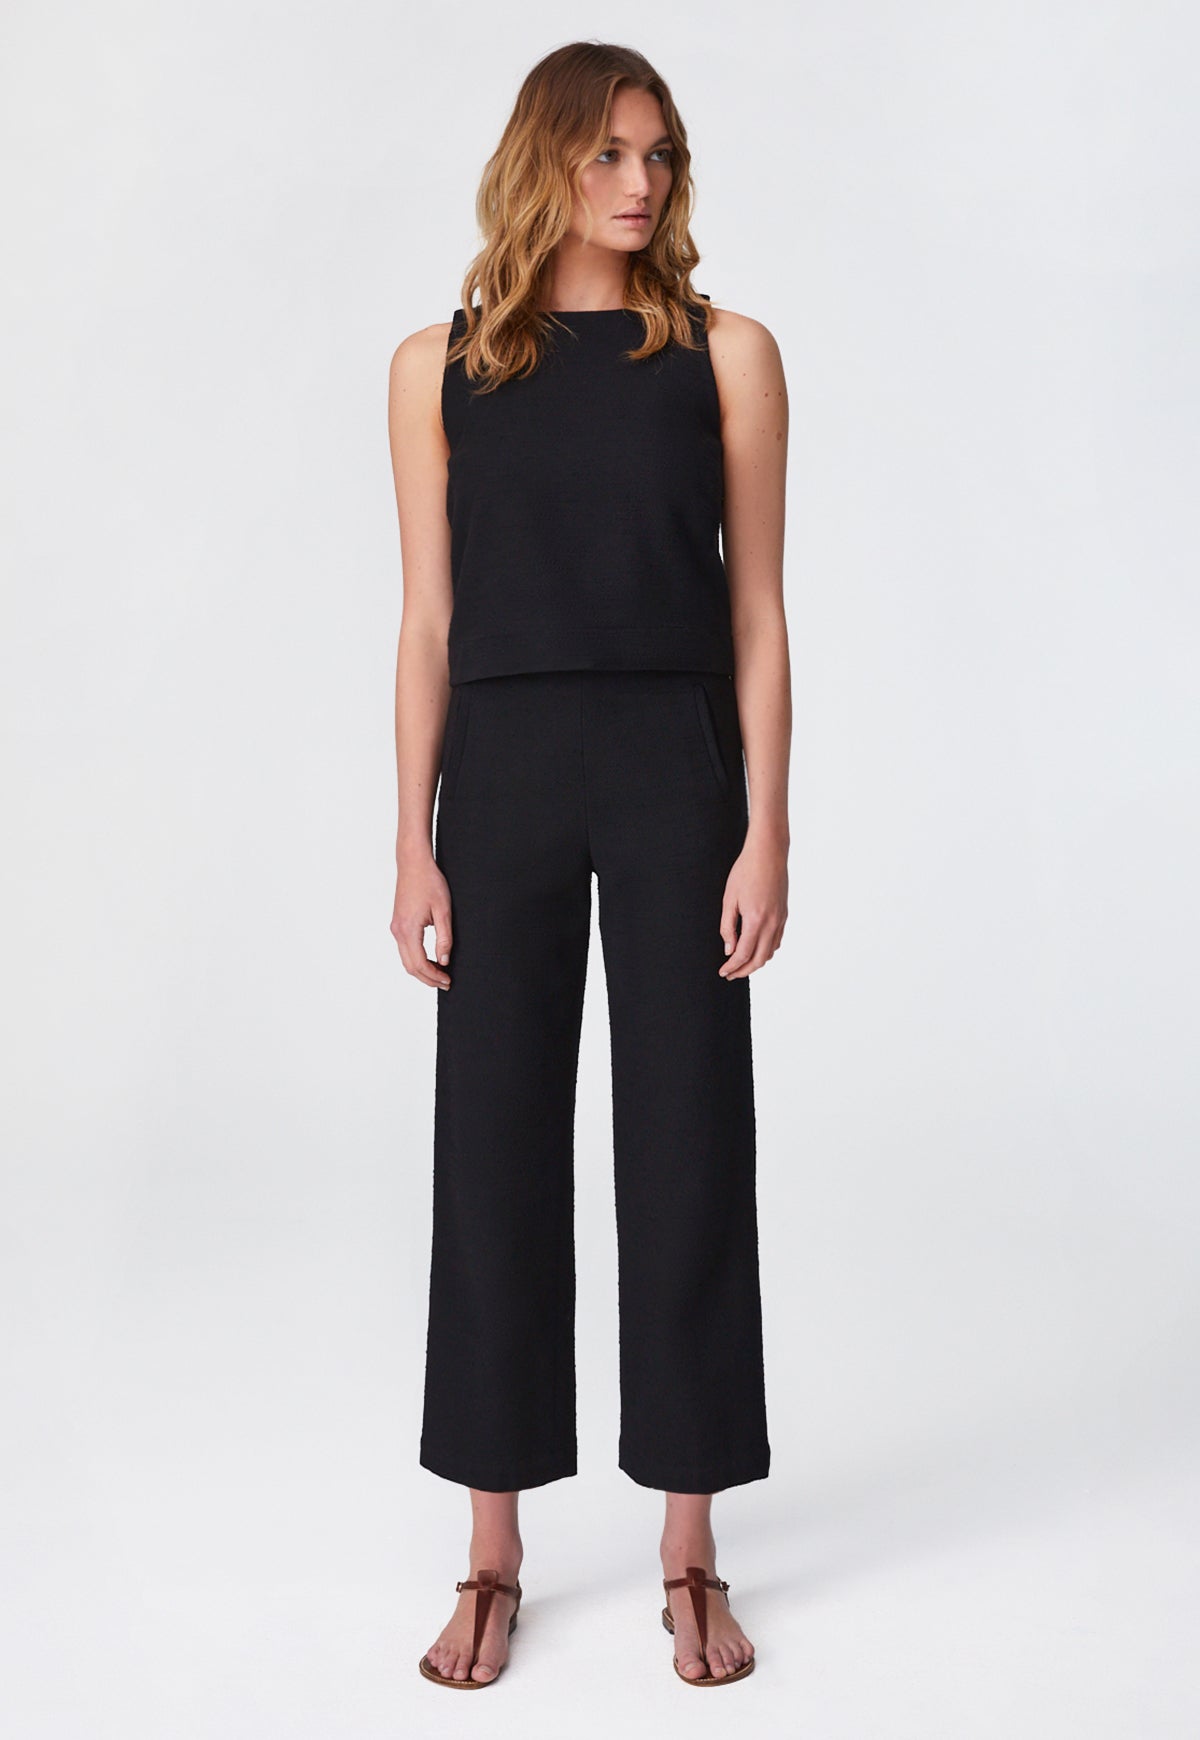 THE STRAIGHT LEG TROUSER in BLACK TEXTURED COTTON